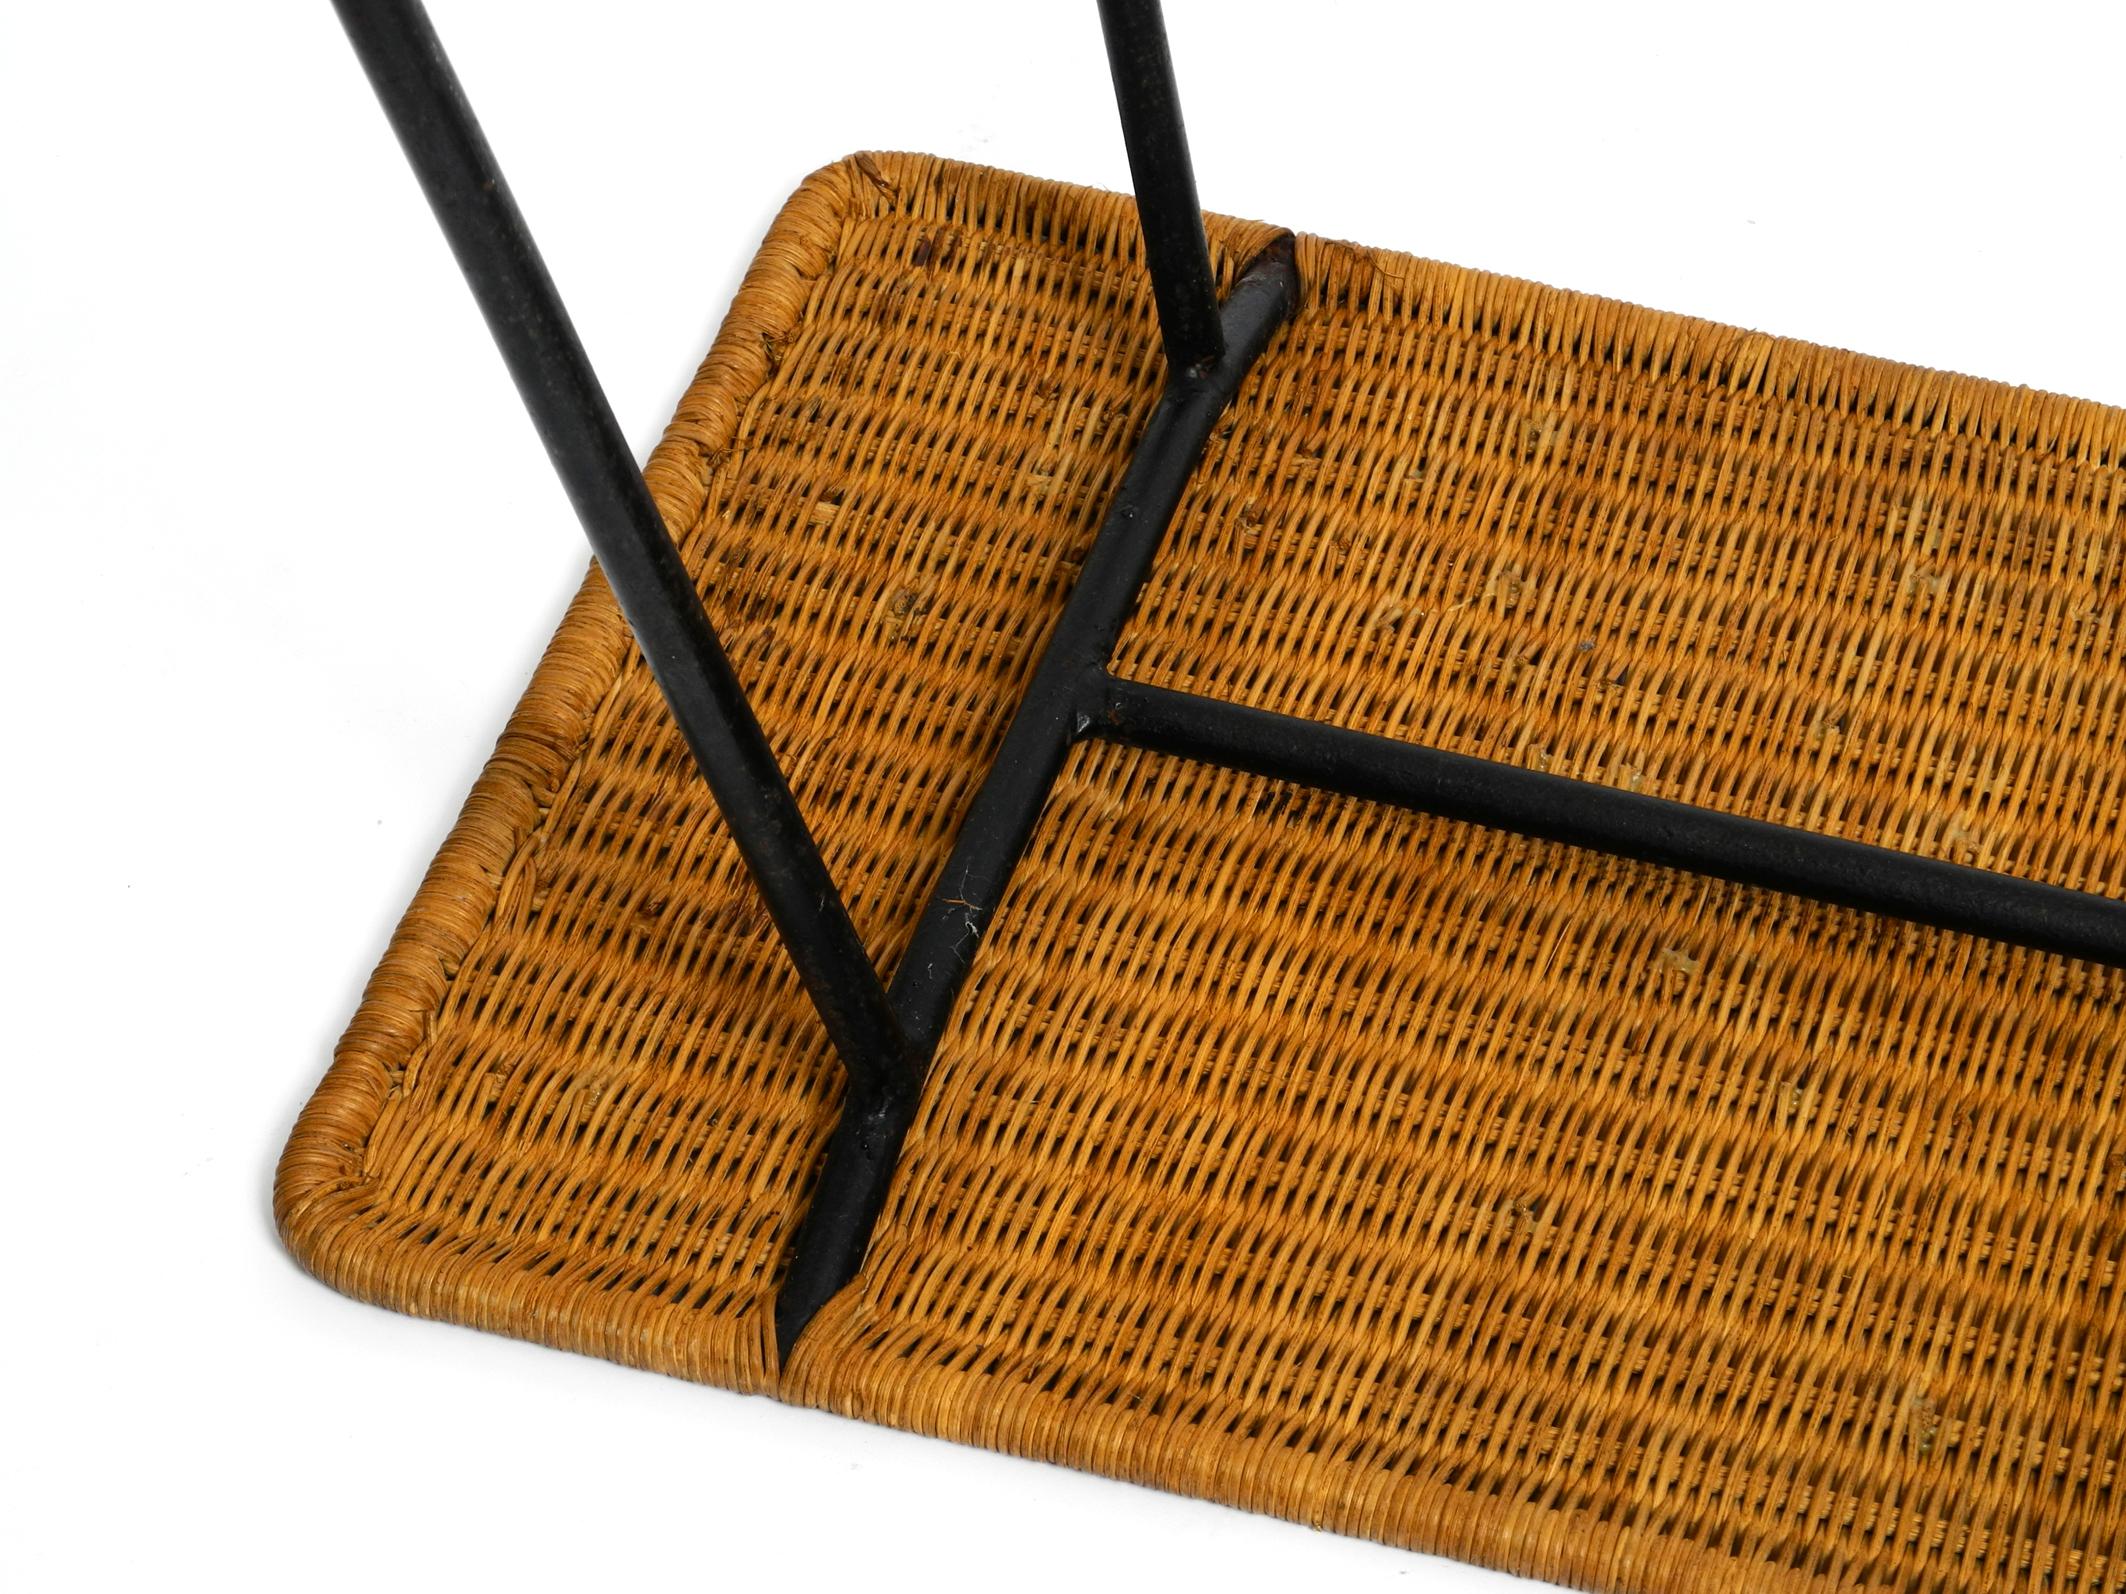 Italian Mid-Century Modern Rattan Side or Coffee Table with a Heavy Iron Frame For Sale 5